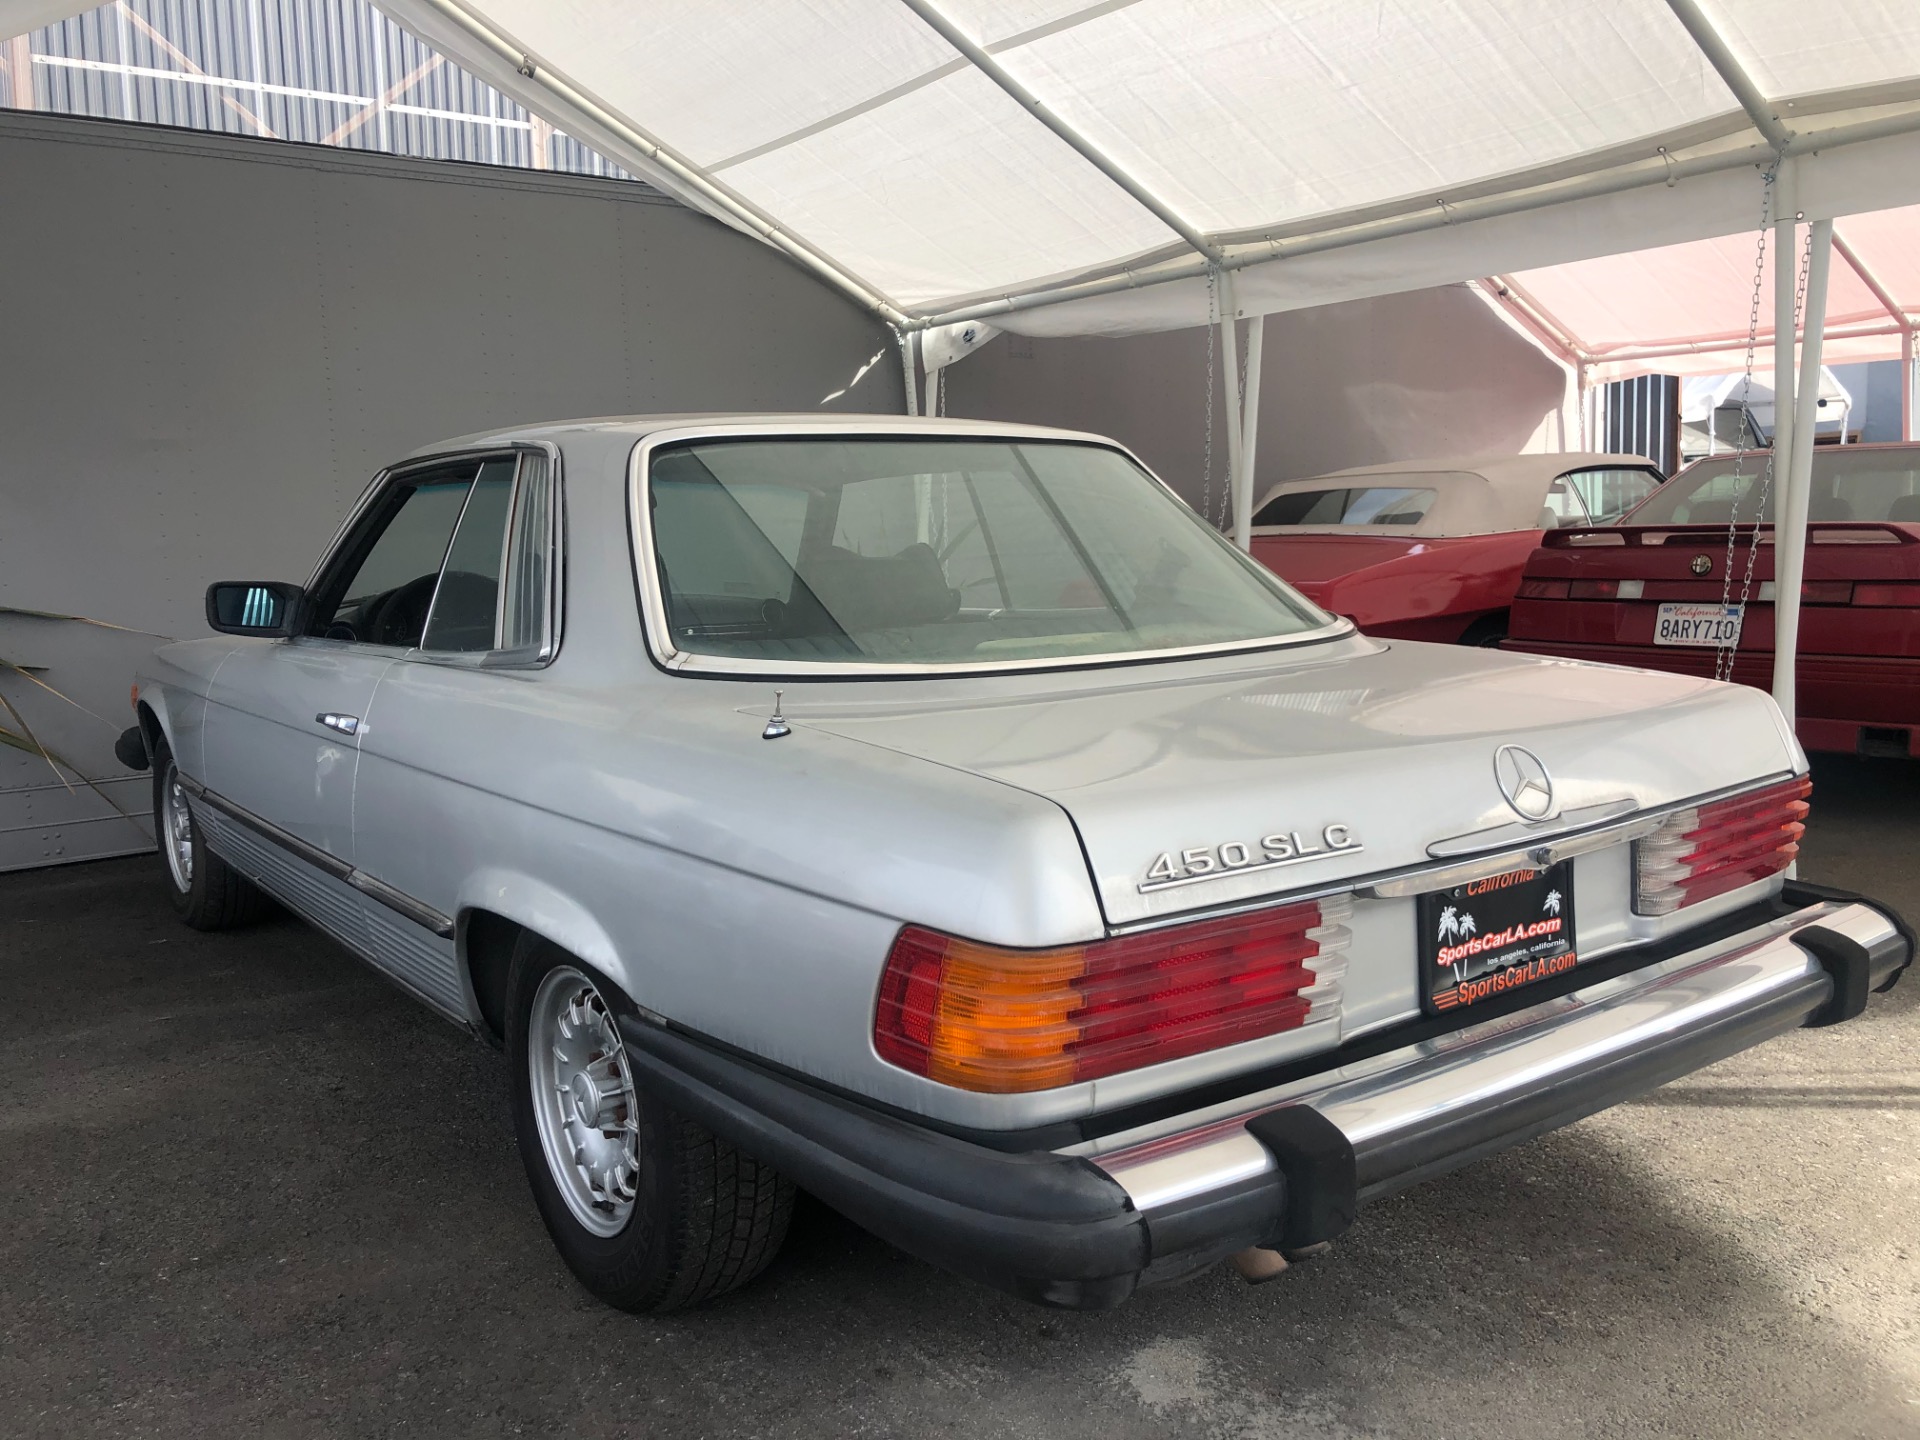 Used 1978 Mercedes Benz 450 Class 450 SLC